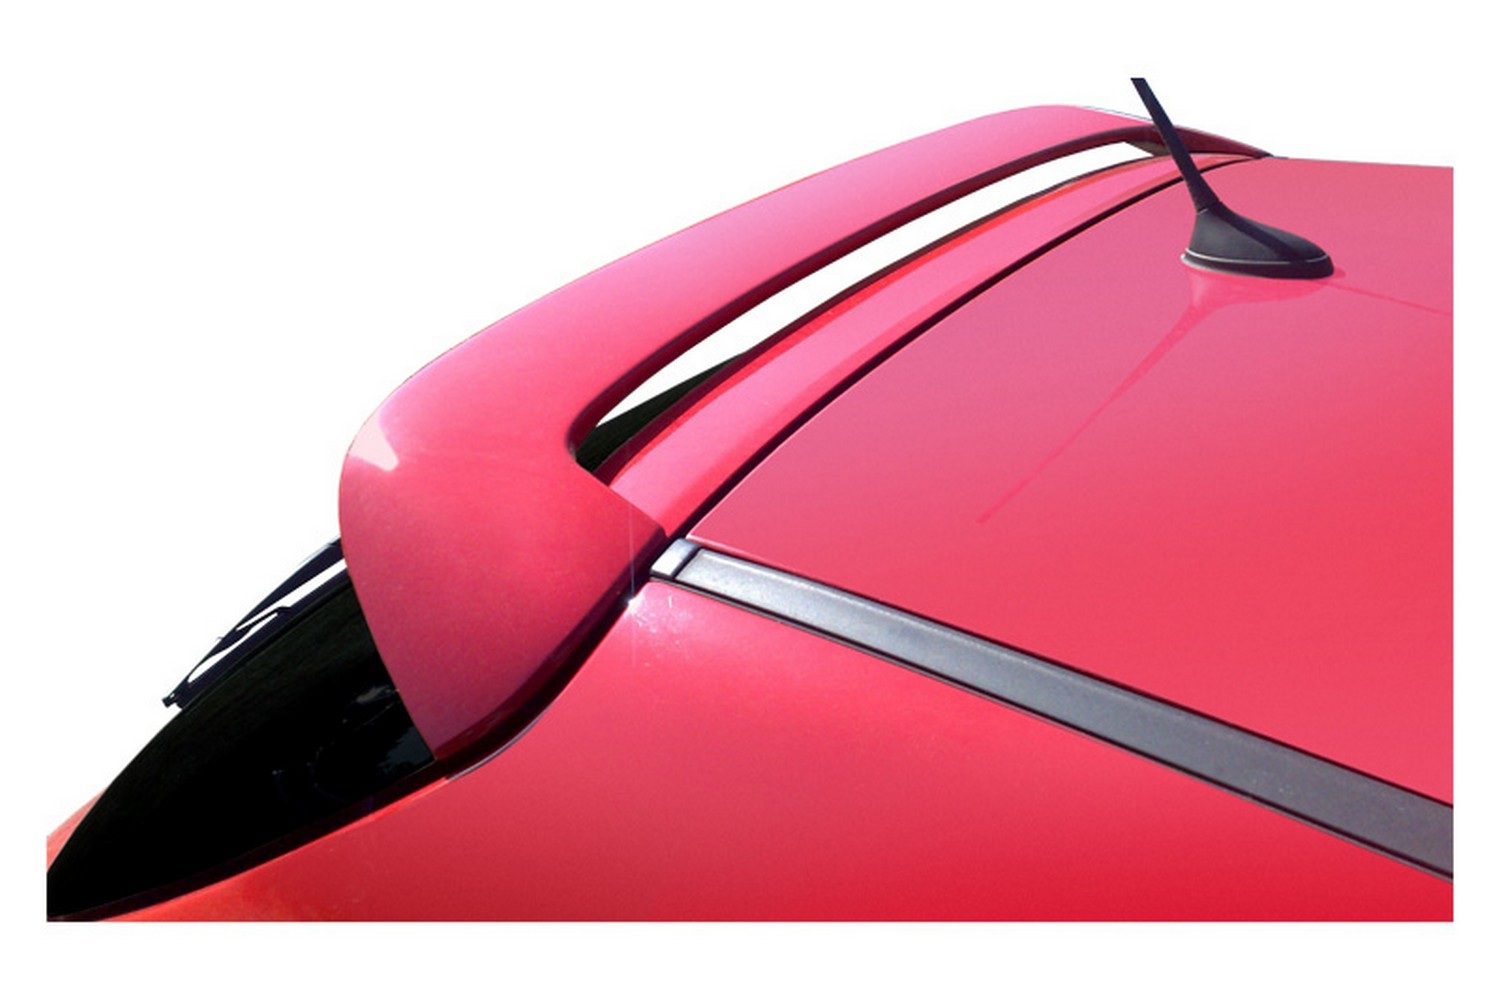 SPOILER REAR TRUNK BOOT TAILGATE PEUGEOT 206 CC coupe cabrio WING  ACCESSORIES